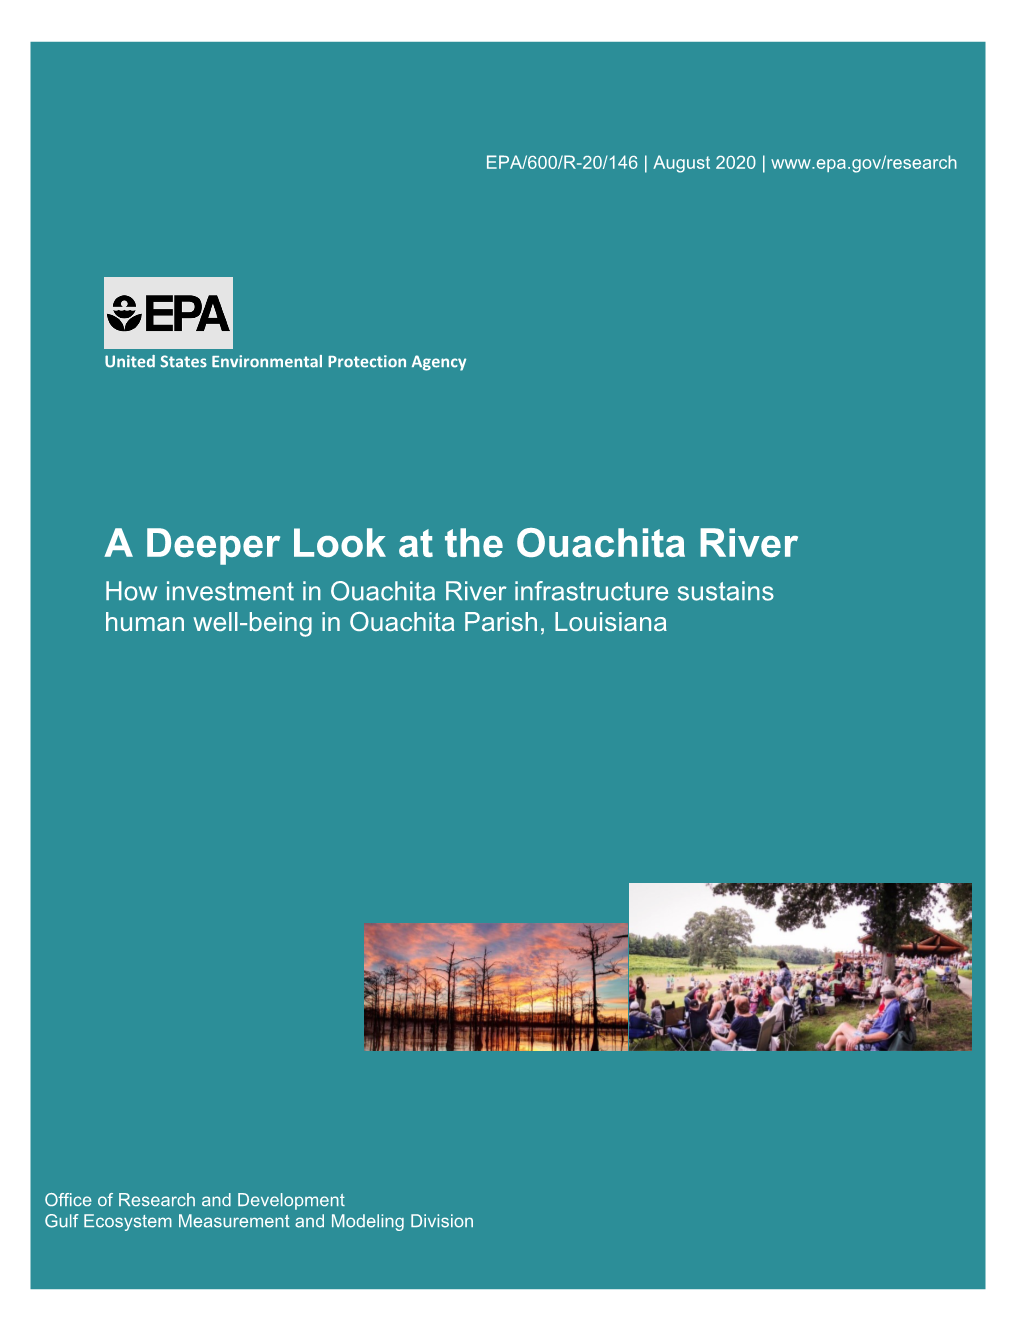 A Deeper Look at the Ouachita River How Investment in Ouachita River Infrastructure Sustains Human Well-Being in Ouachita Parish, Louisiana